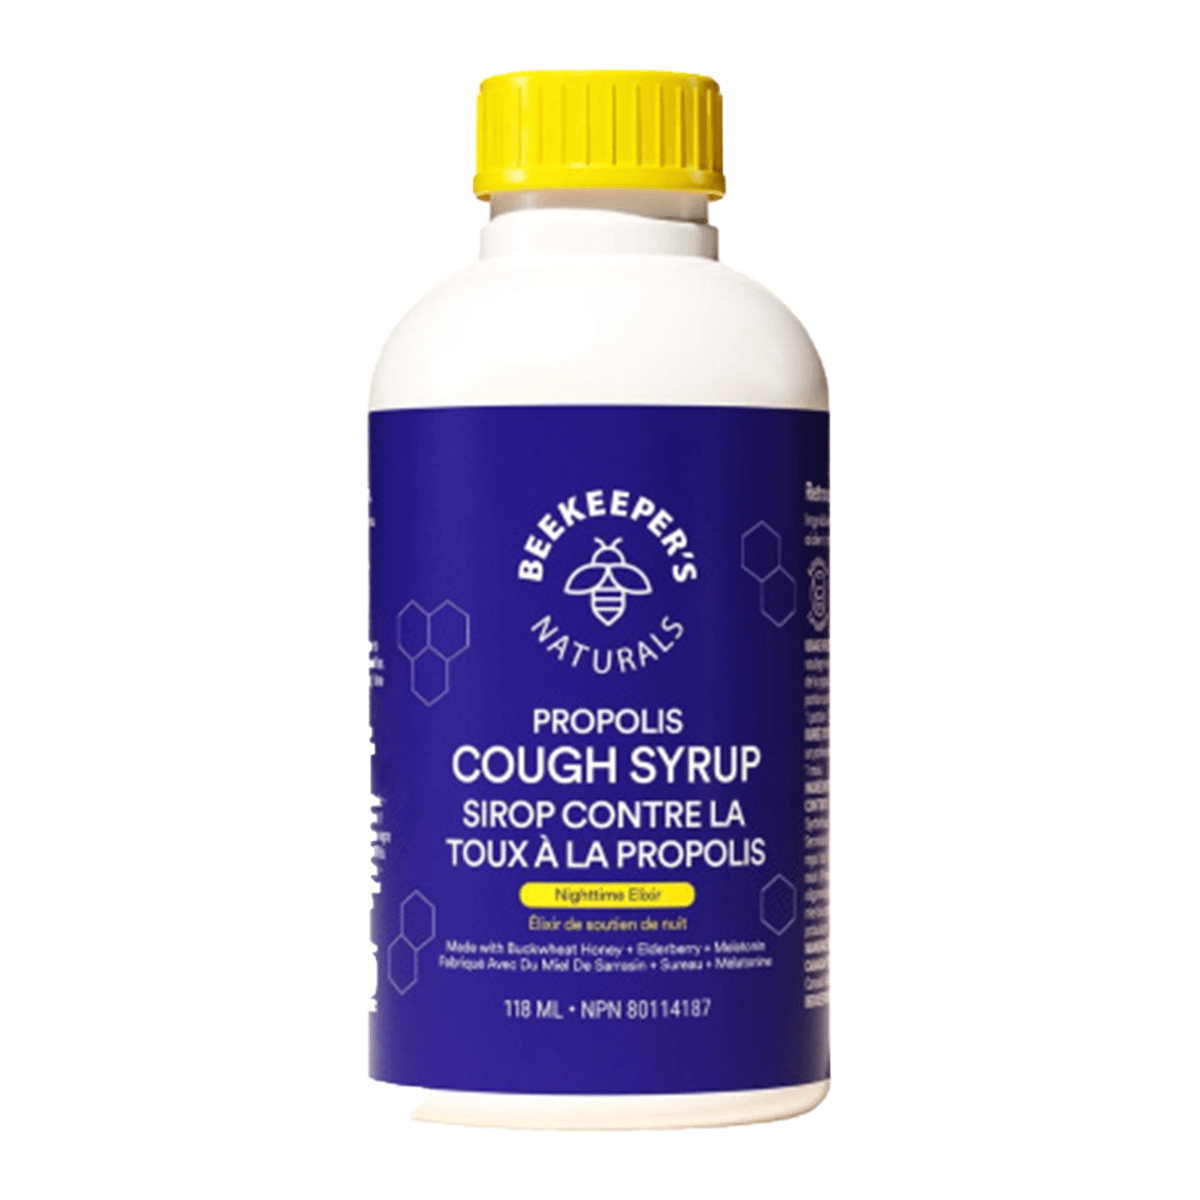 Beekeeper's Naturals Propolis Cough Syrup Night Time 118mL Cough, Cold & Flu at Village Vitamin Store